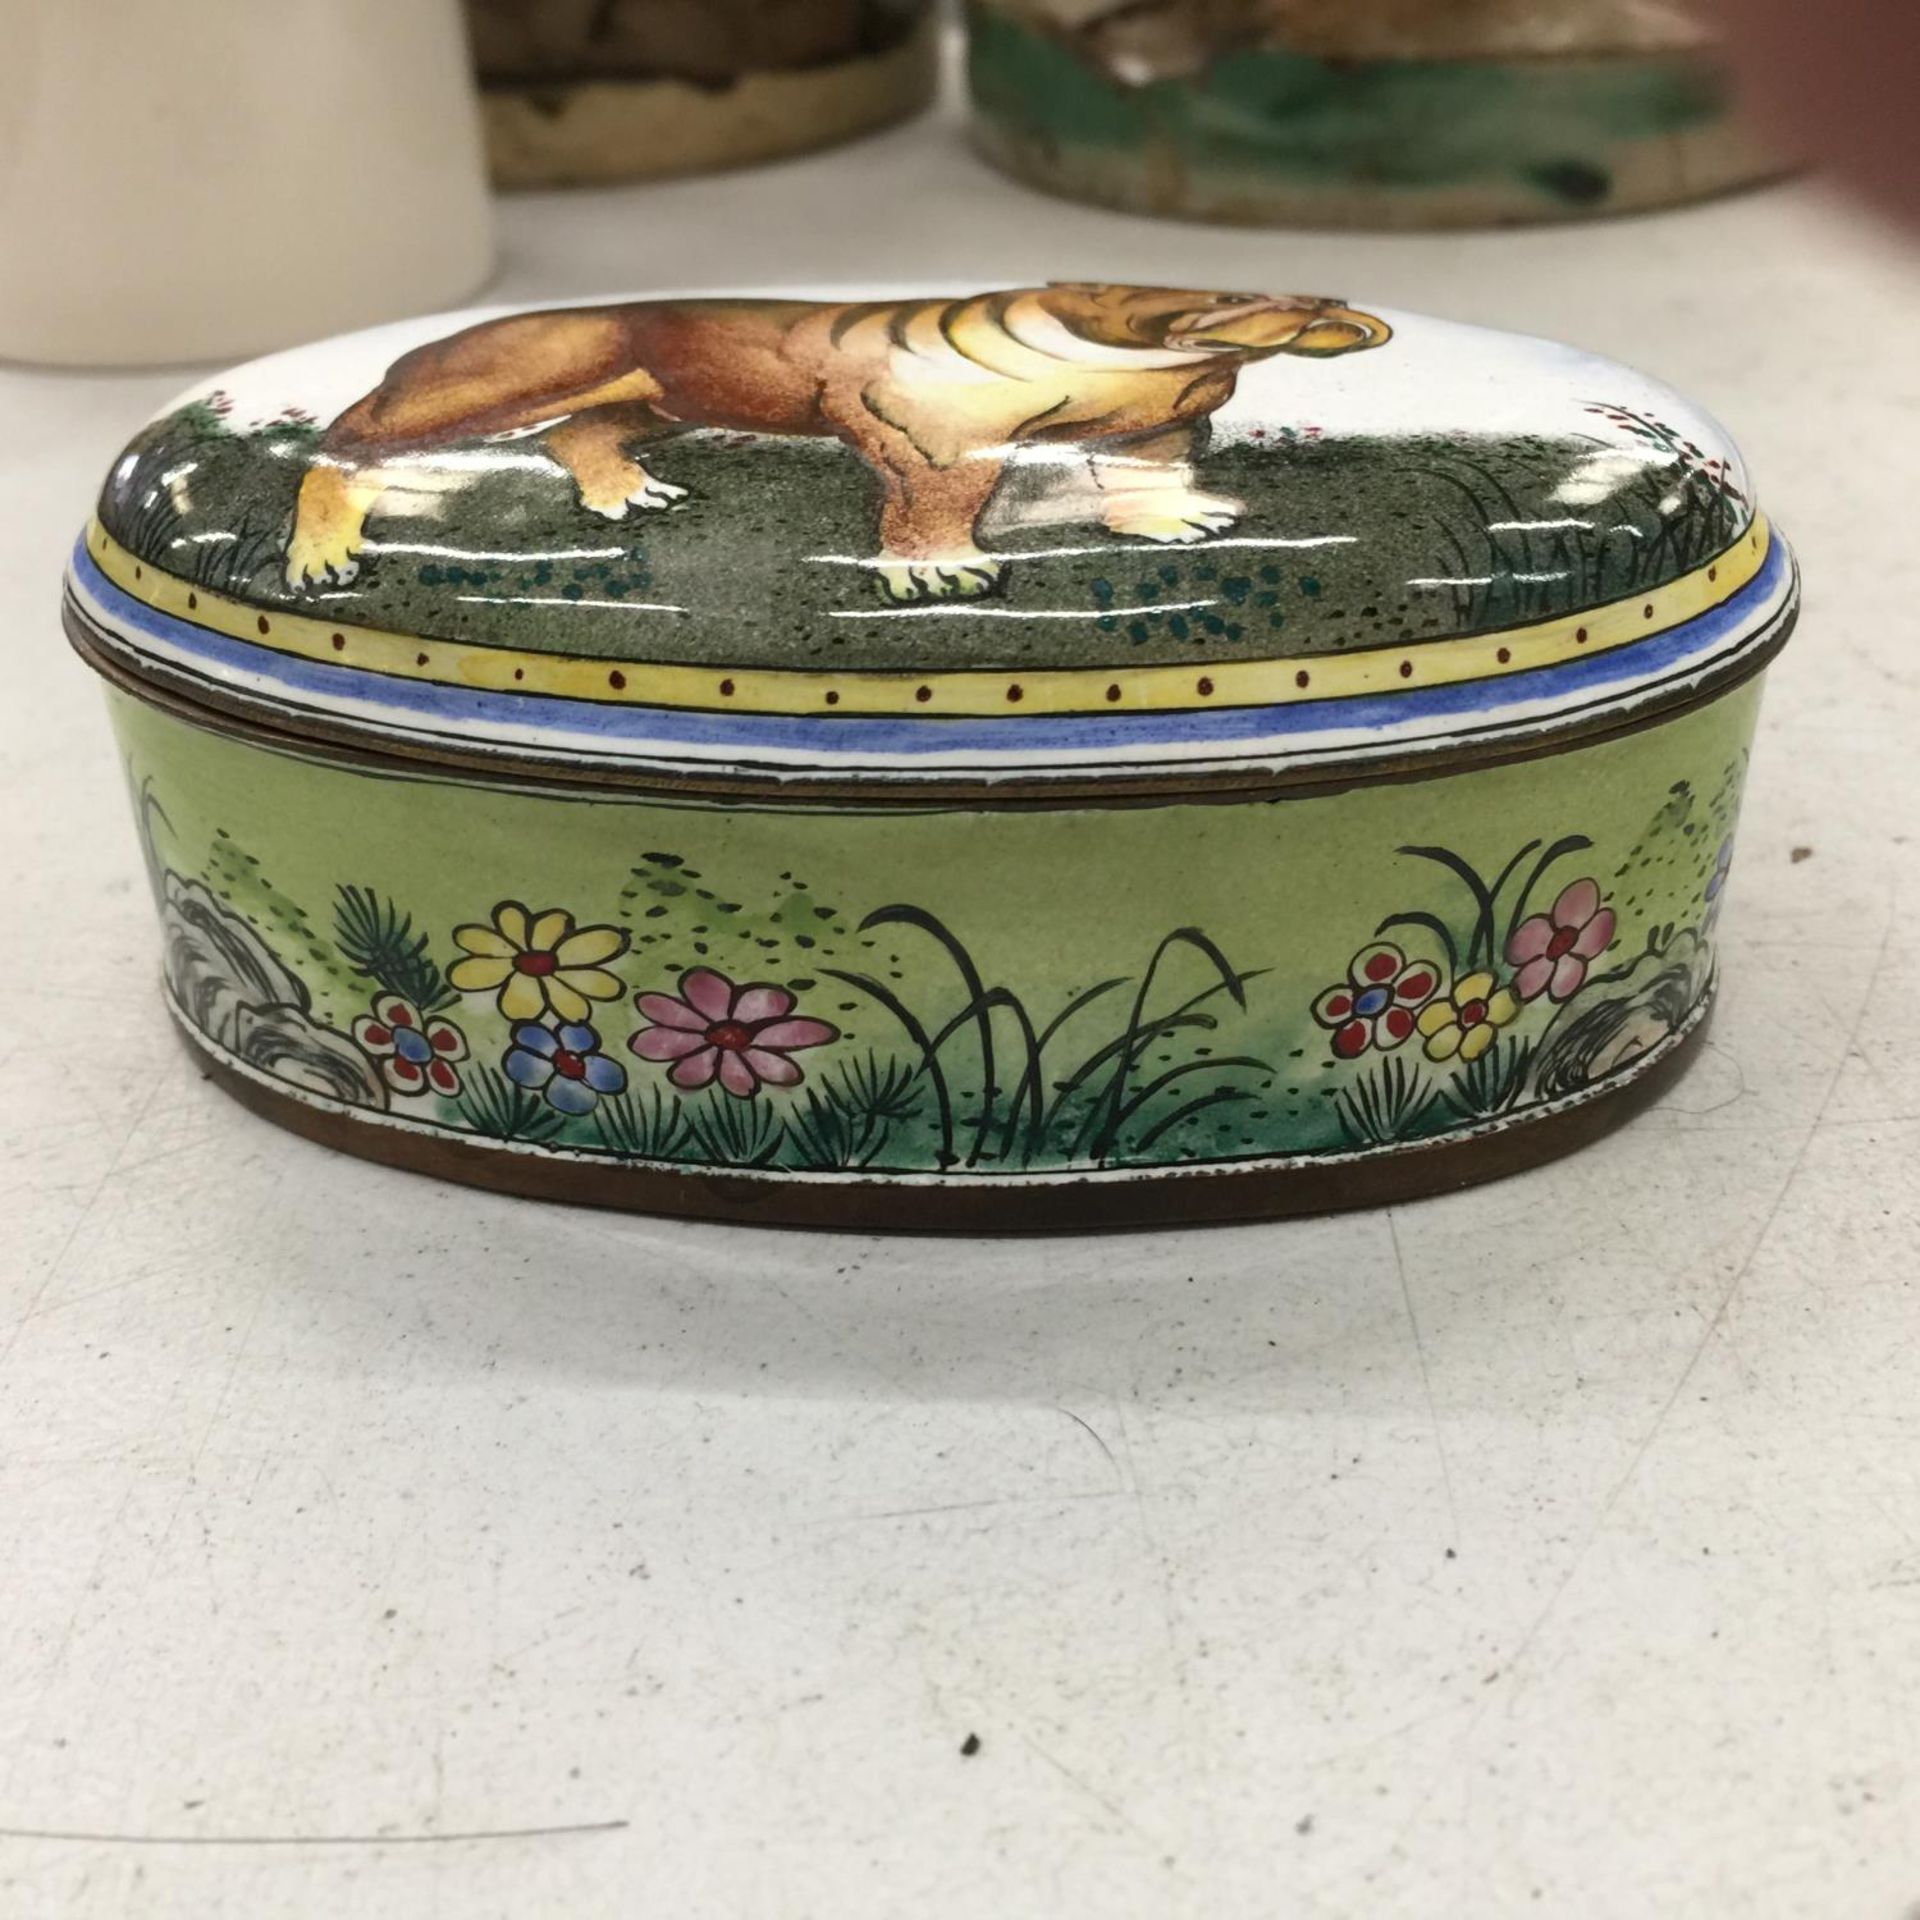 A CLOISONNE TRINKET BOX WITH BULLDOG LID - Image 2 of 3